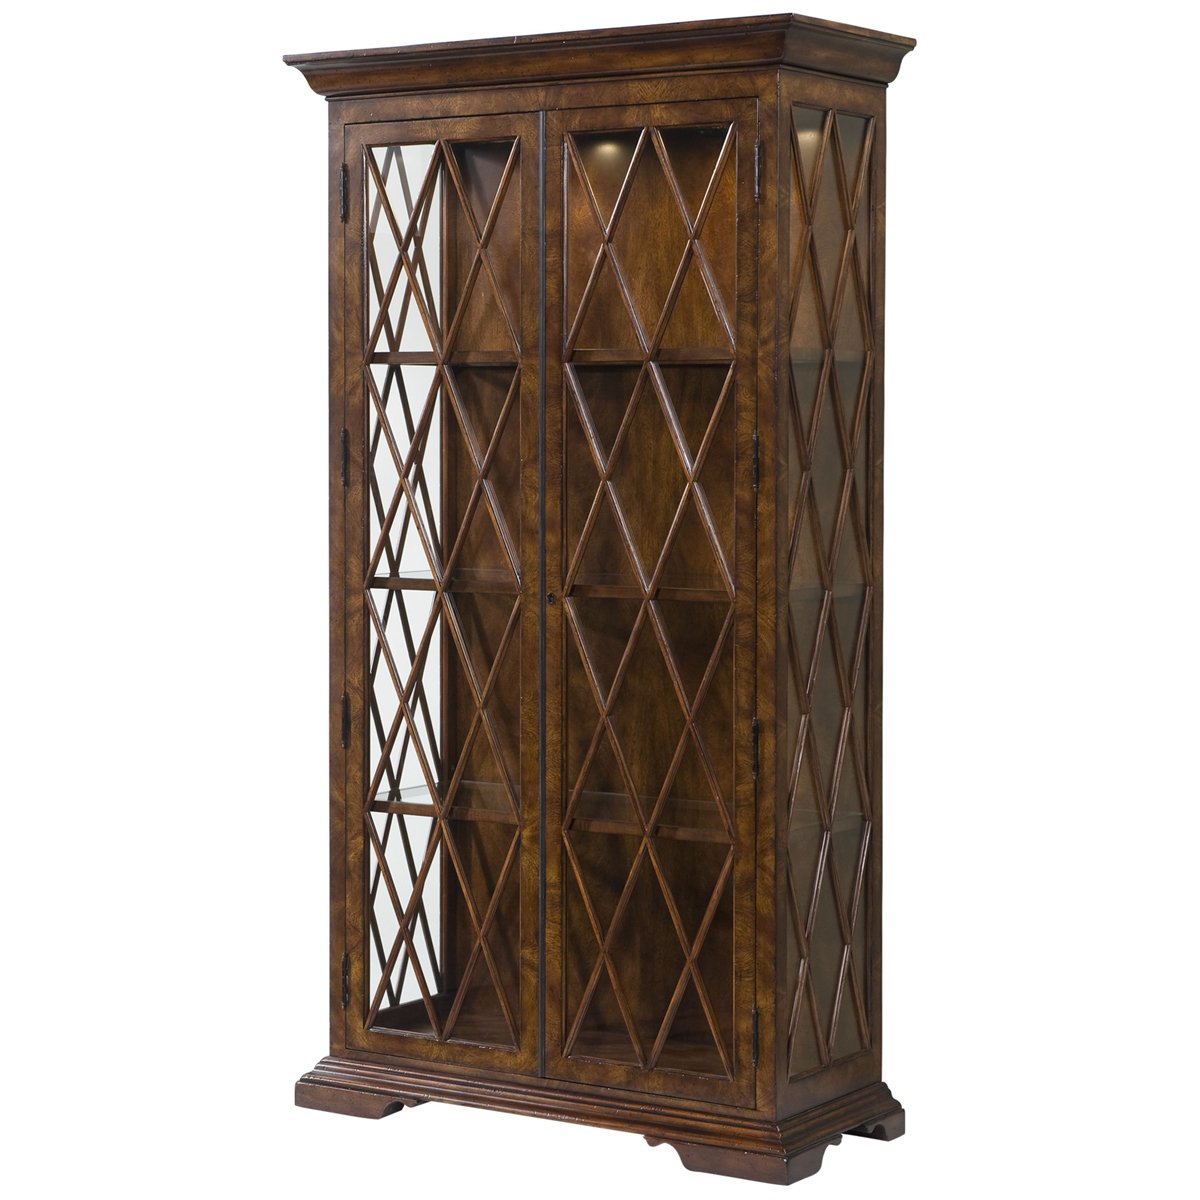 Theodore Alexander Brooksby Brooksby Display Cabinet